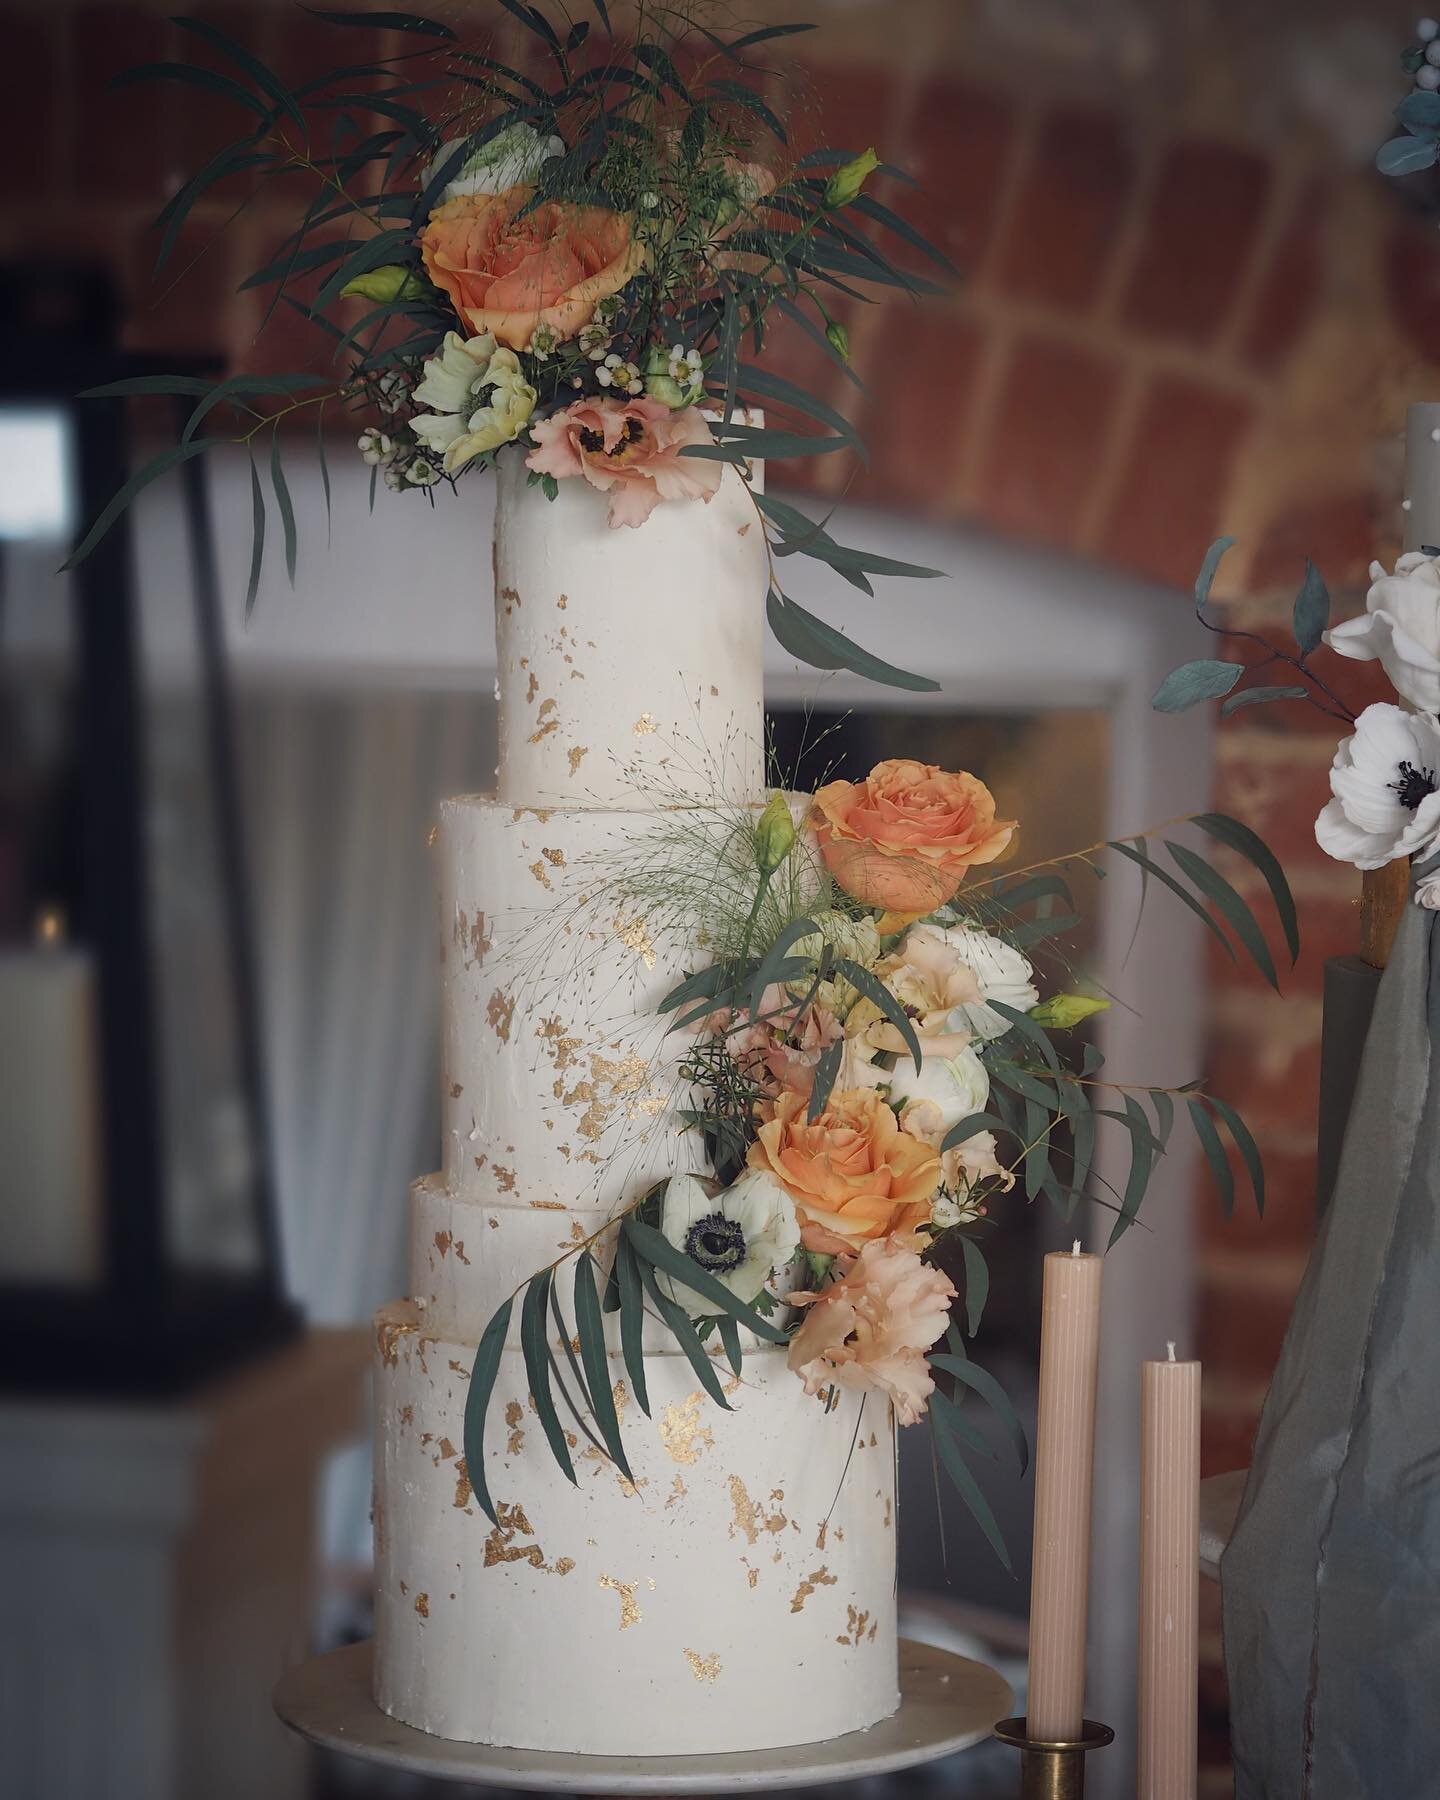 That cake I was dressing in beautiful wild florals from @villagefloristlancing! 
.
We are booking up fast after the @farbridgeevents showcase, with only a few spaces here and there for 2023, and oh my, some of the briefs coming through are just to di